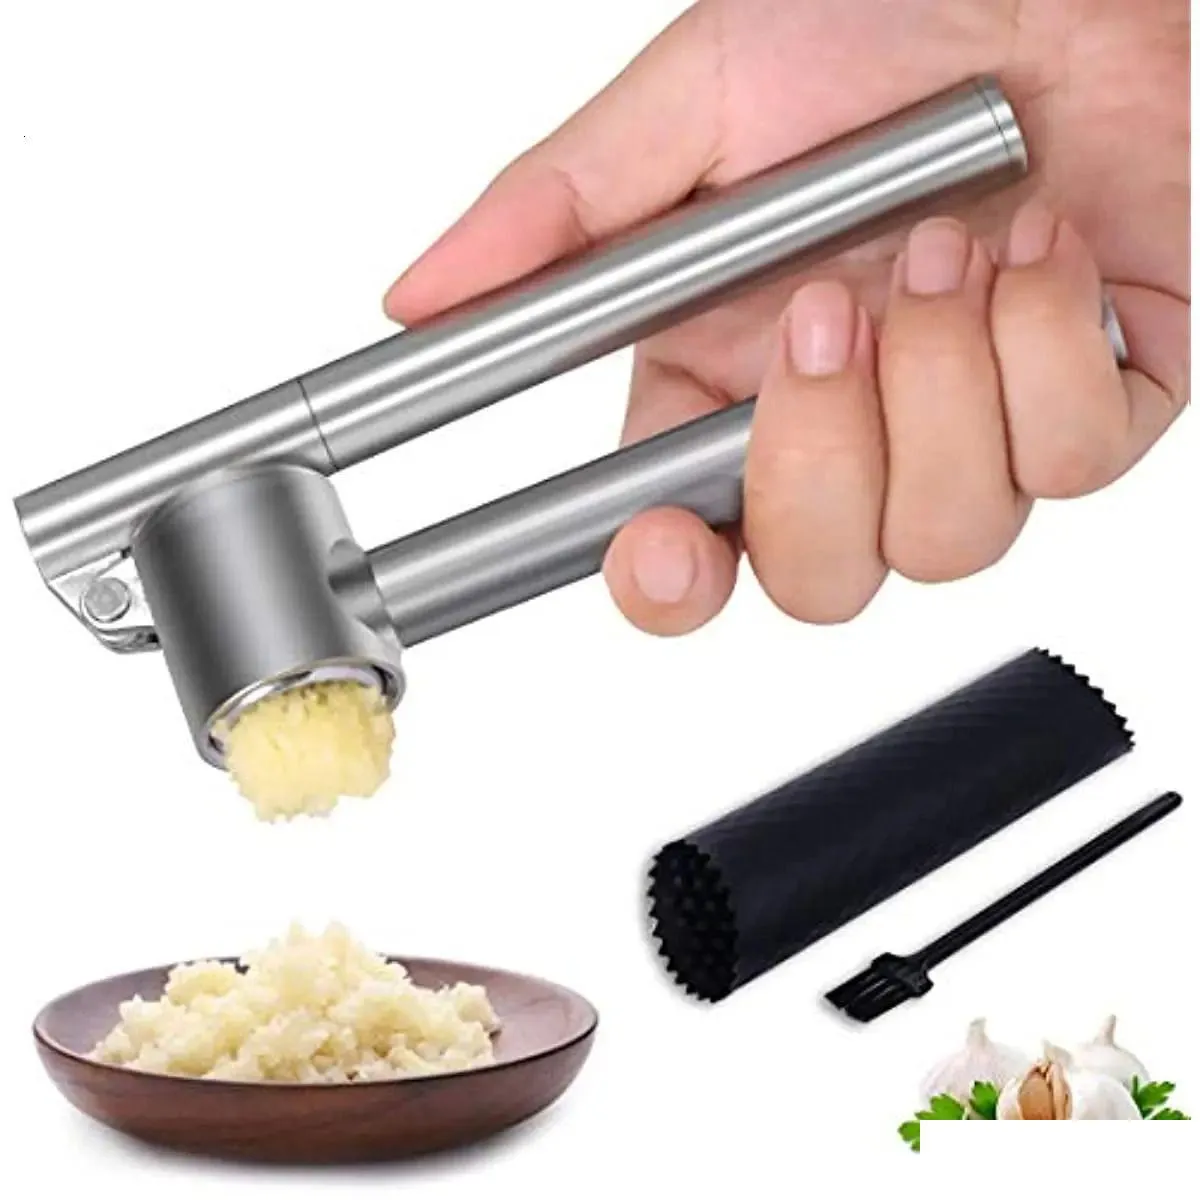 Fruit Vegetable Tools 304 Stainless Steel Garlic Press Detachable Peeling Grinding Slicer Chopper Set Cooking Gadgets Kitchen Acce Dh8Zd